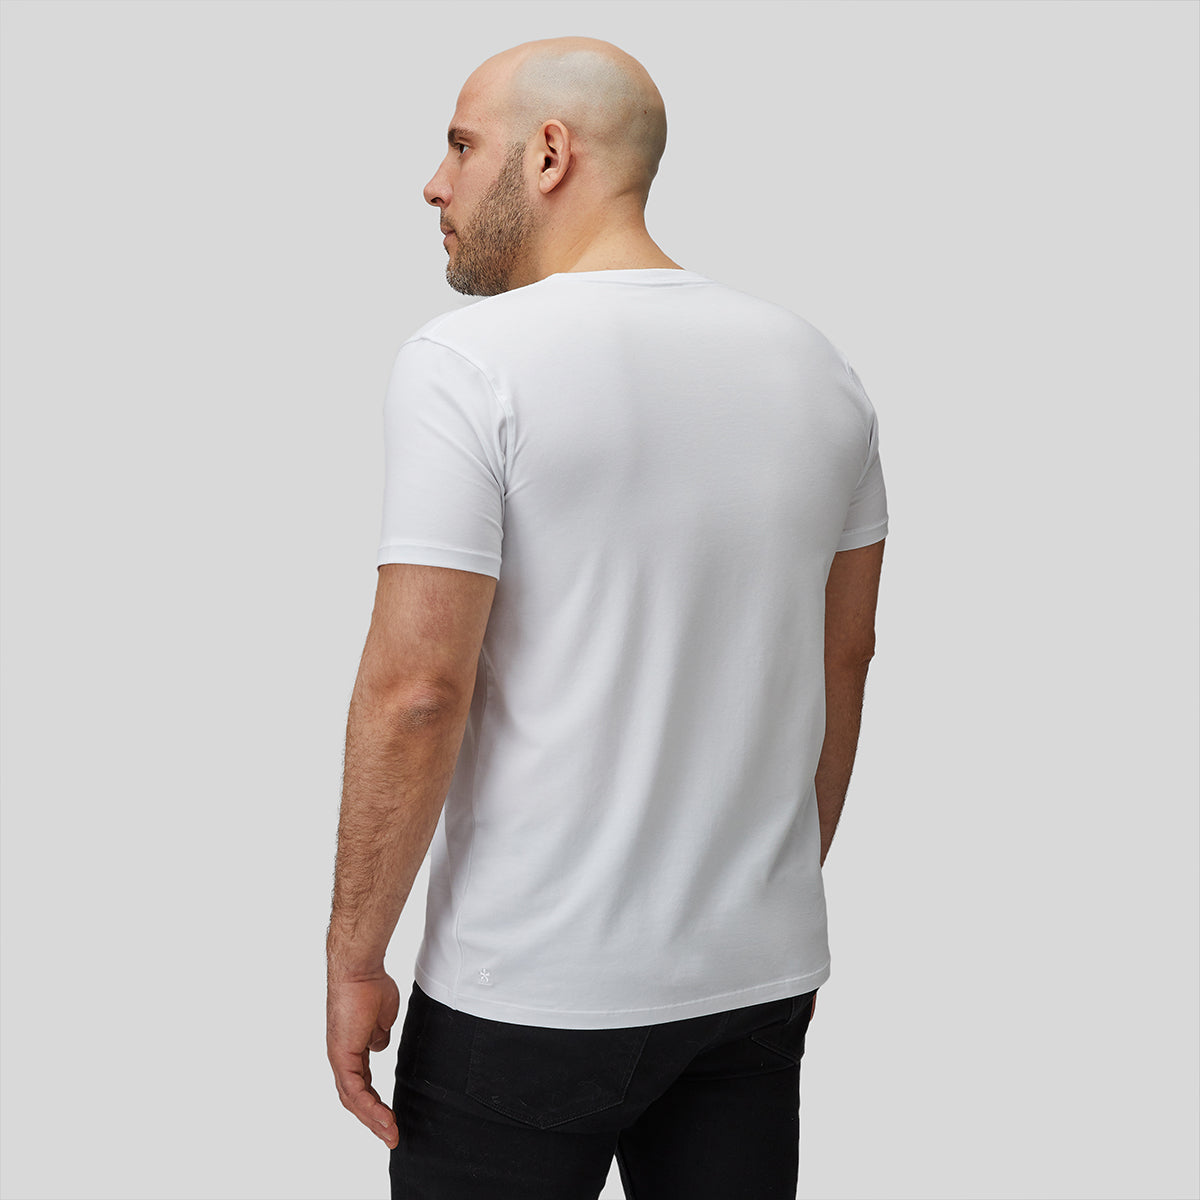 Model with white t-shirt rear angle